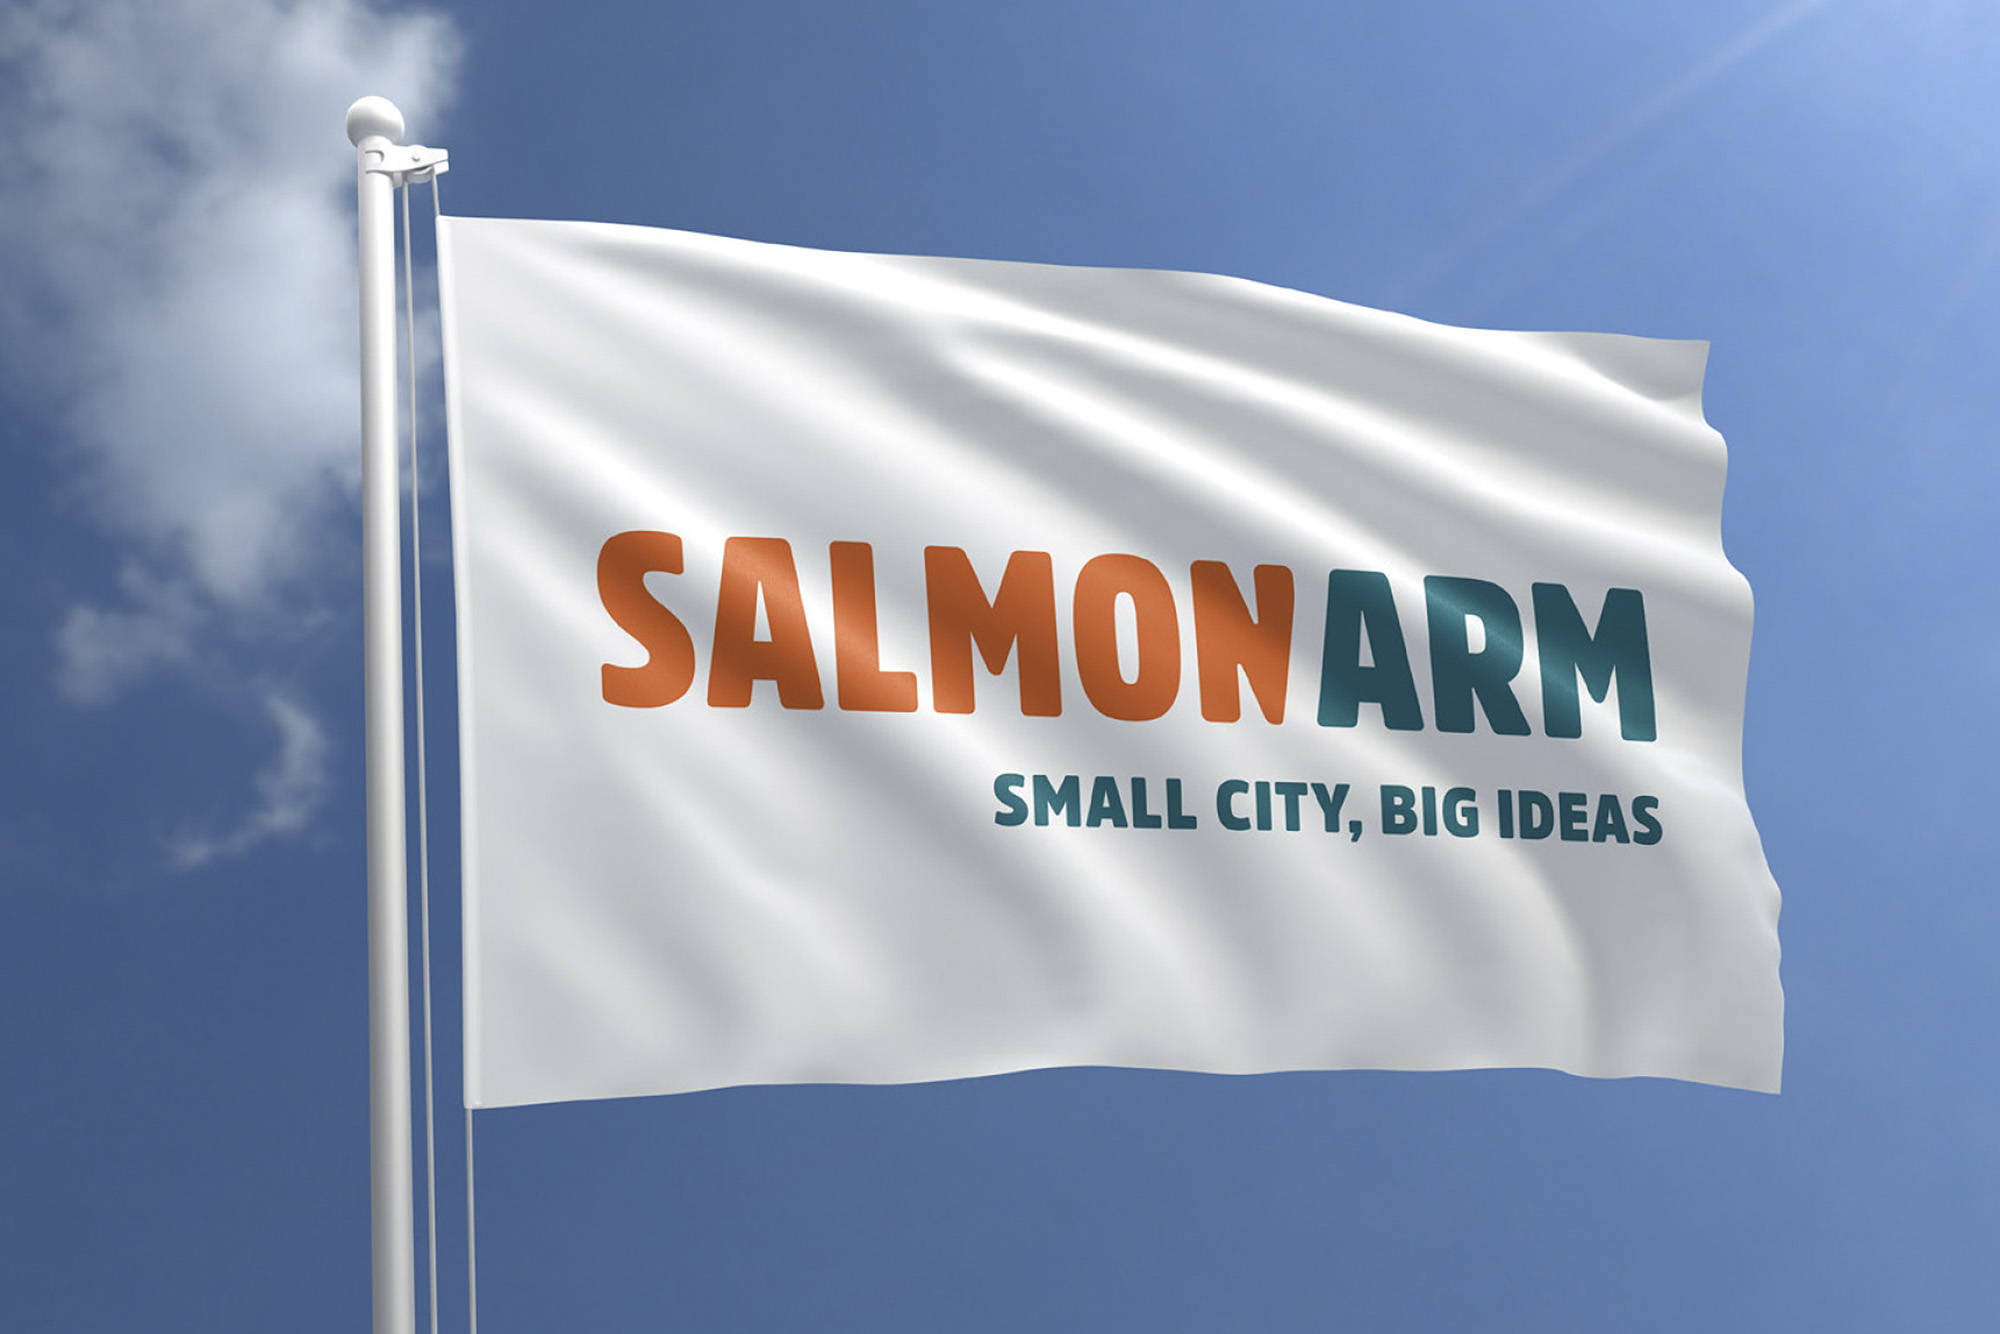 The majority of city council votes in favour of this design for a new Salmon Arm flag on Monday, May 10, 2021. (City of Salmon Arm image)